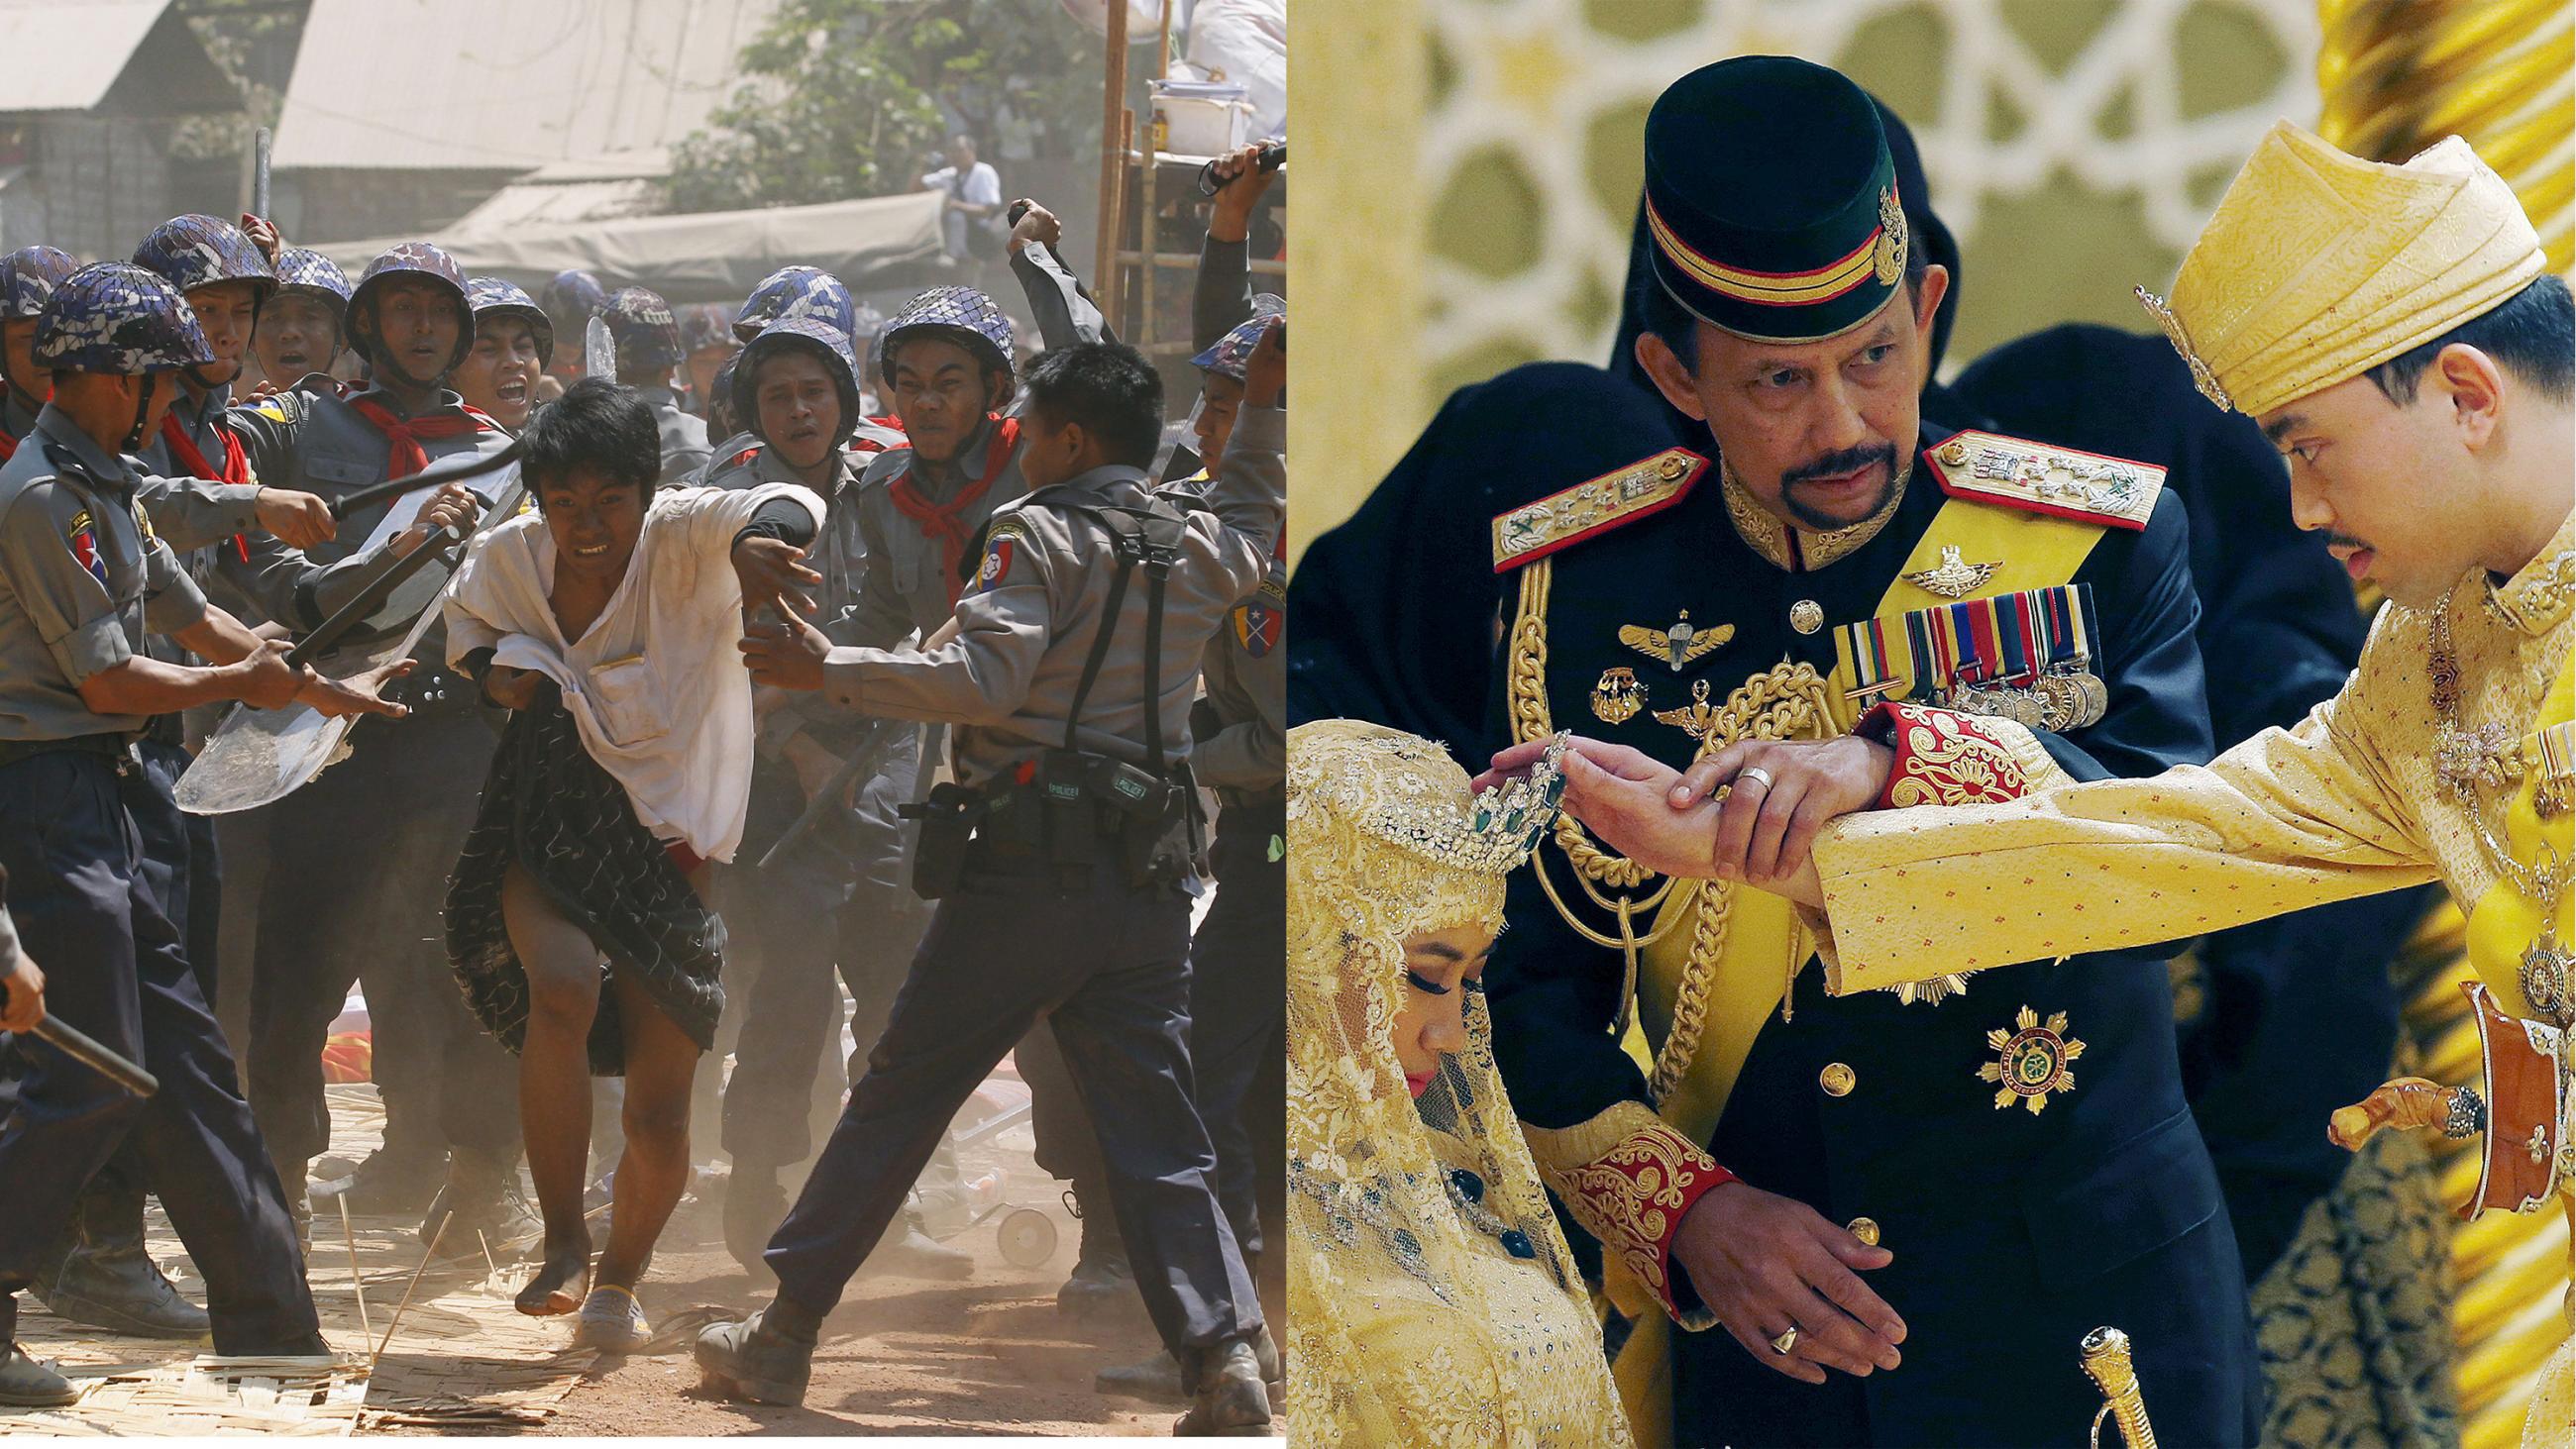 The image has two very contrasting photos. One shows a group of soldiers violently beating a protester with batons and the other is a royal wedding with ever square centimeter covered in opulence. 